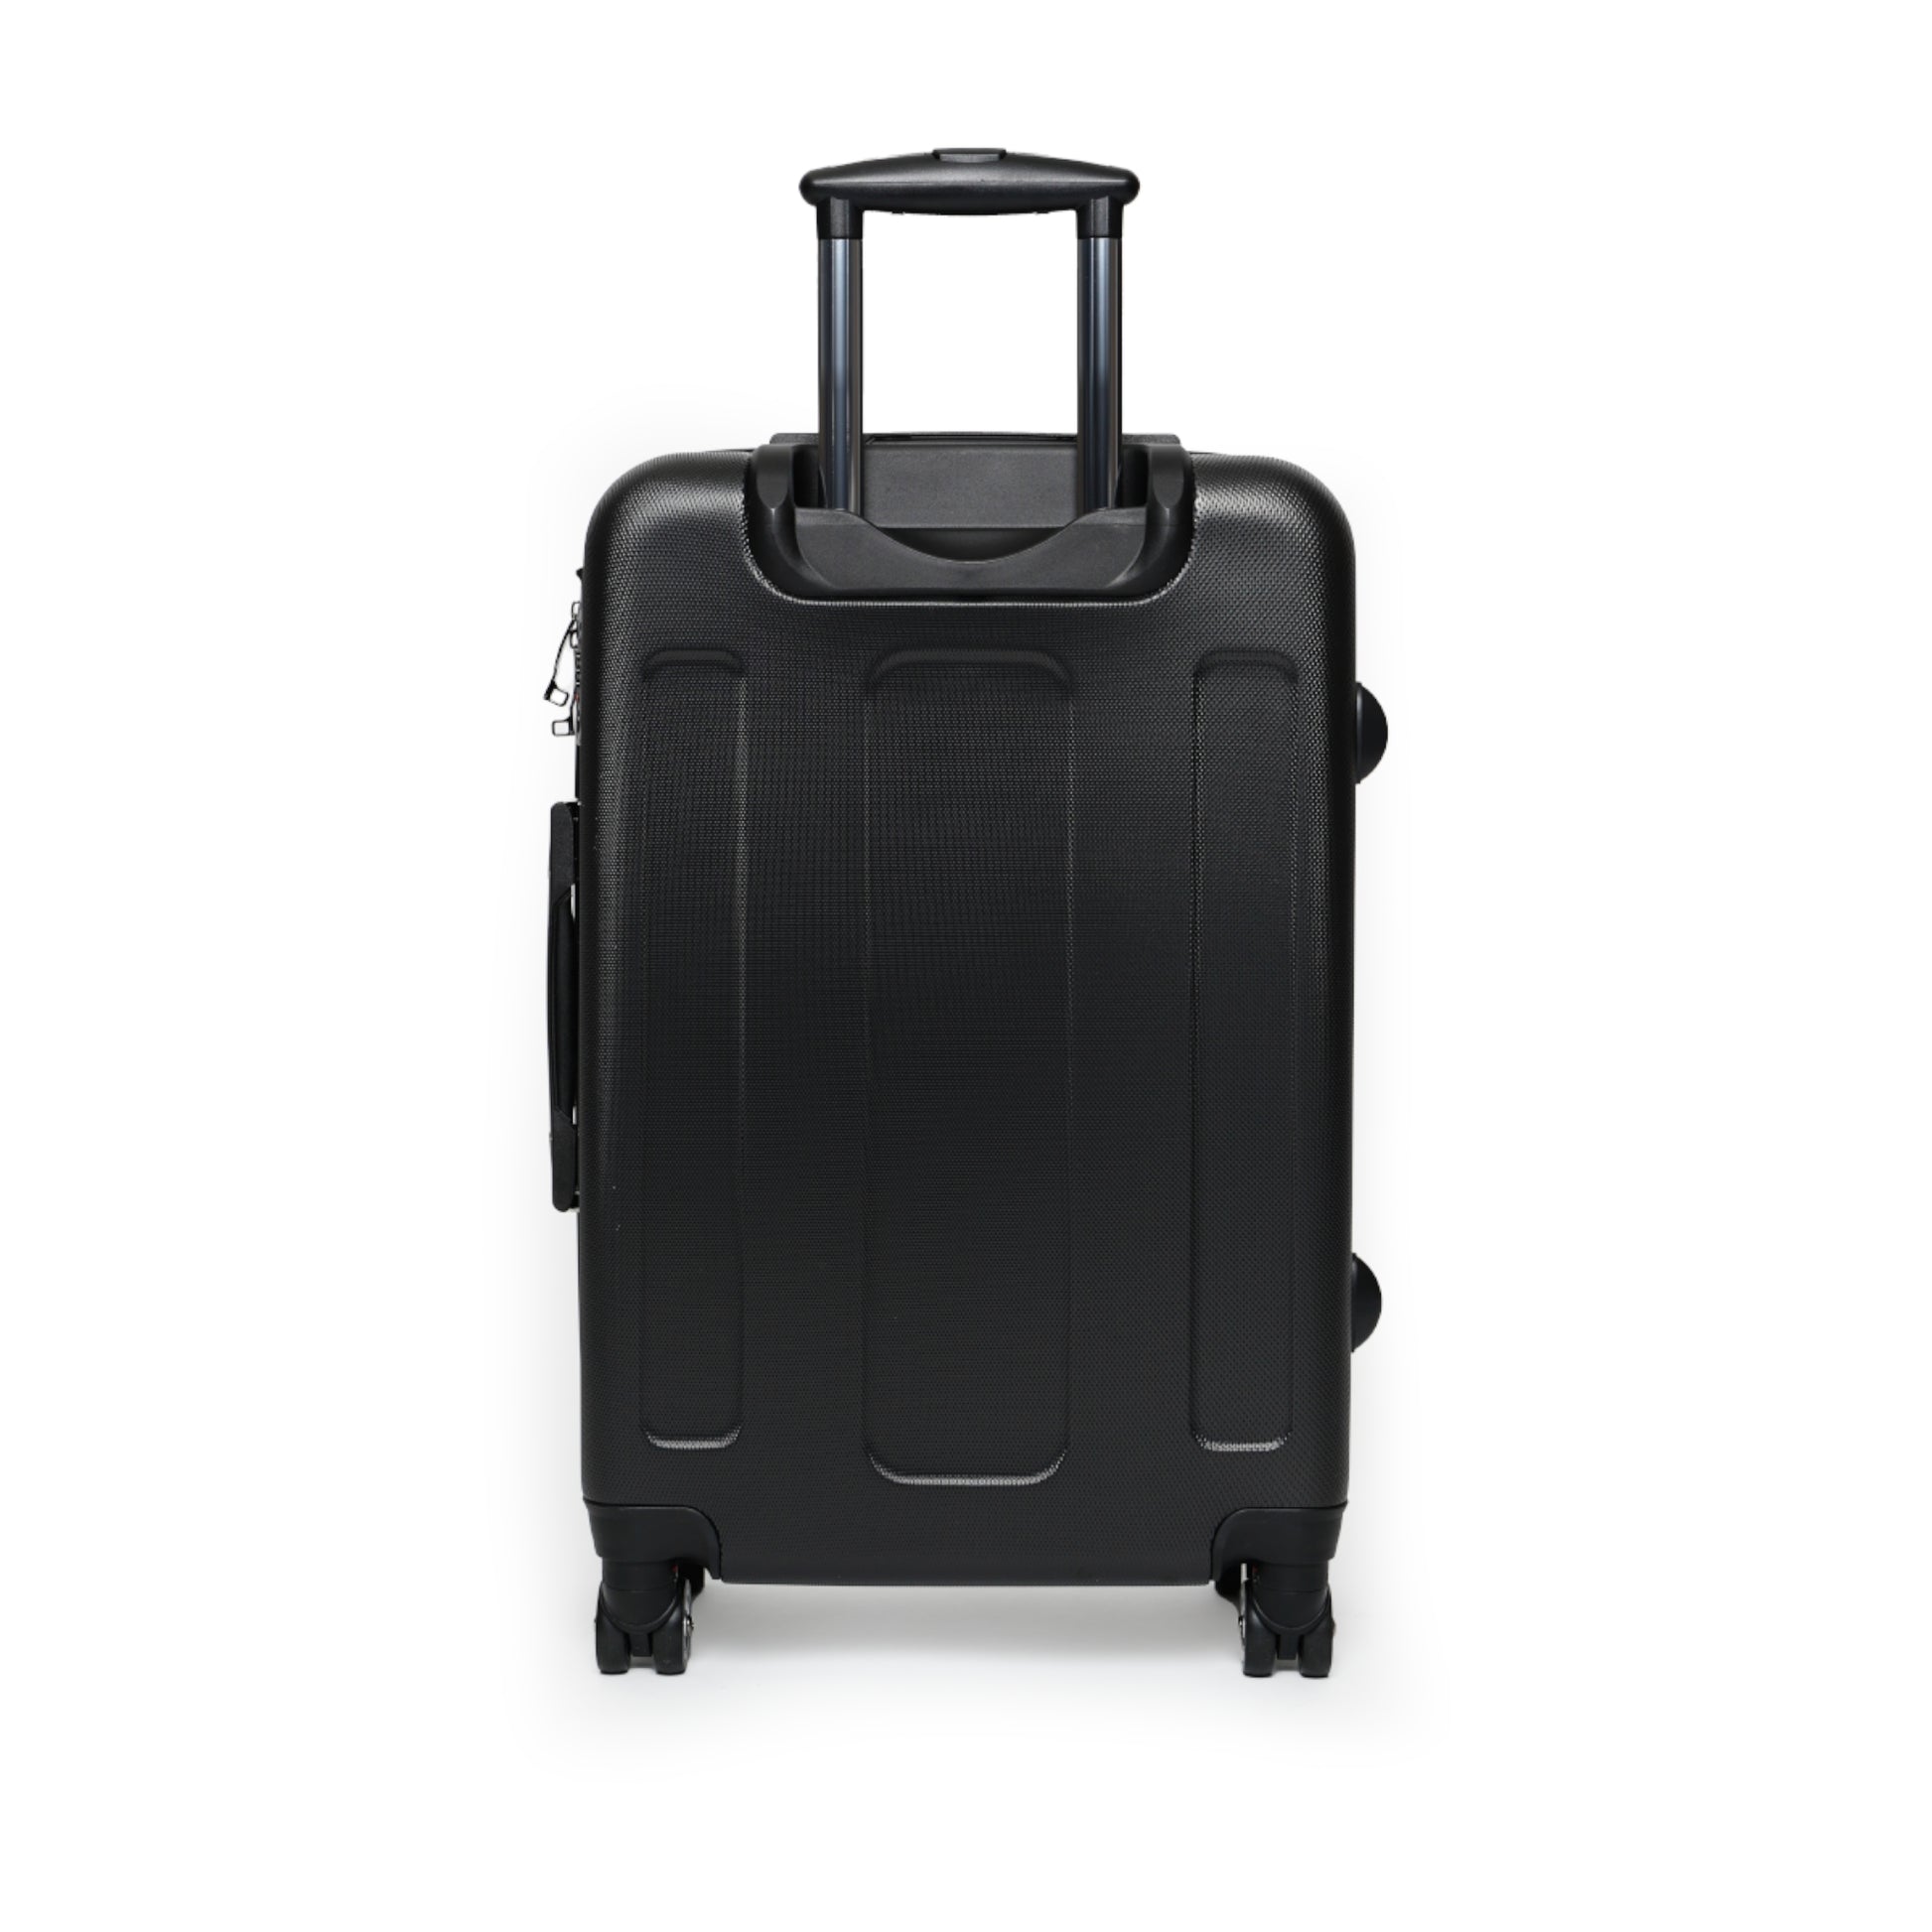 back view of suitcase black with telescoping handle